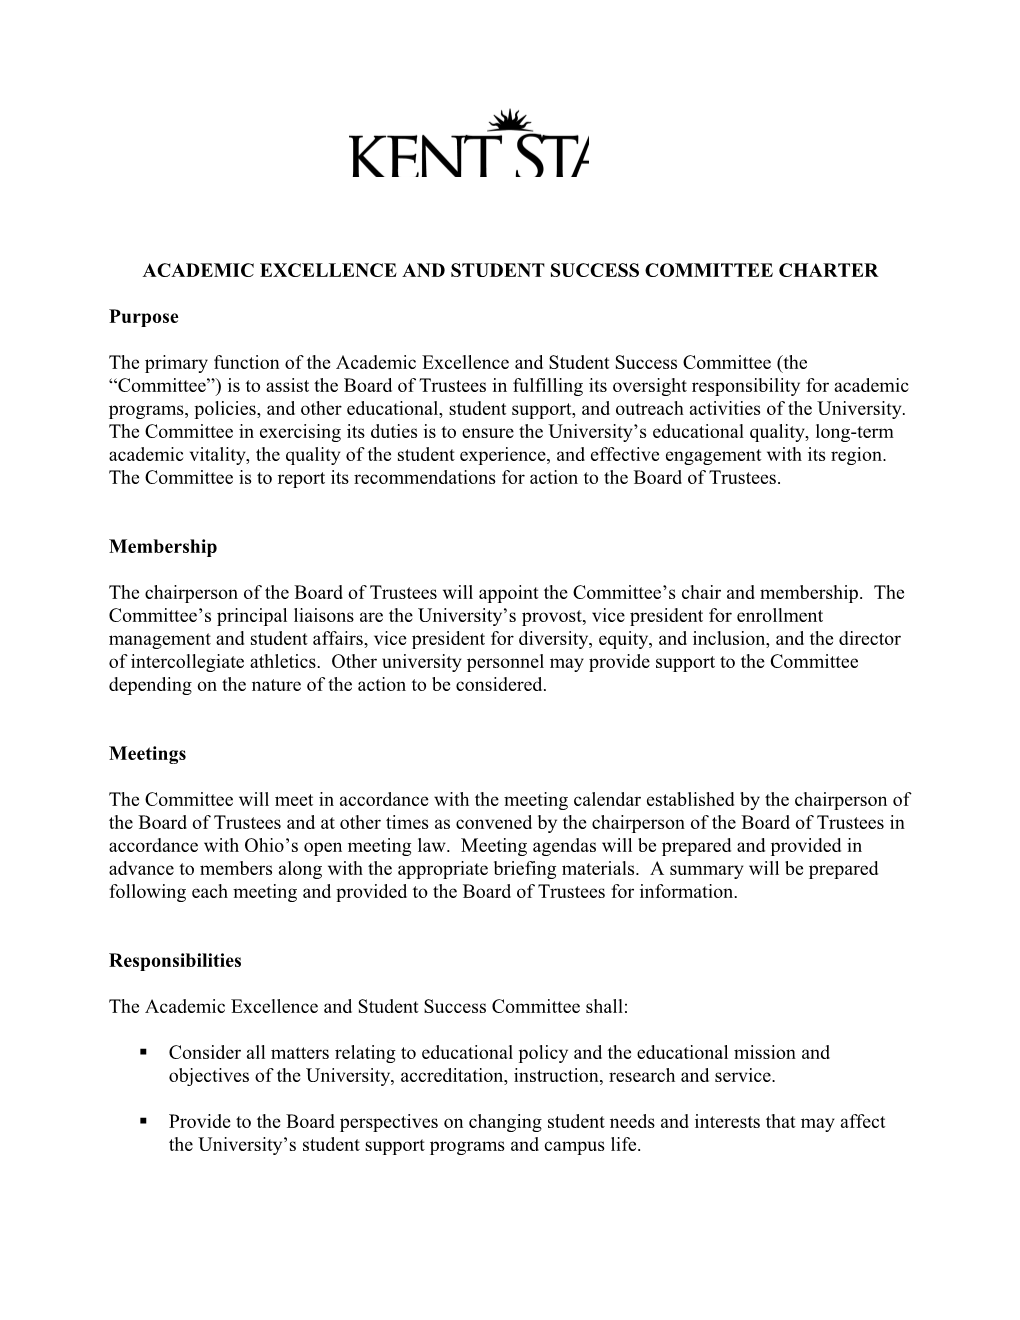 Academic Excellence and Student Success Committee Charter